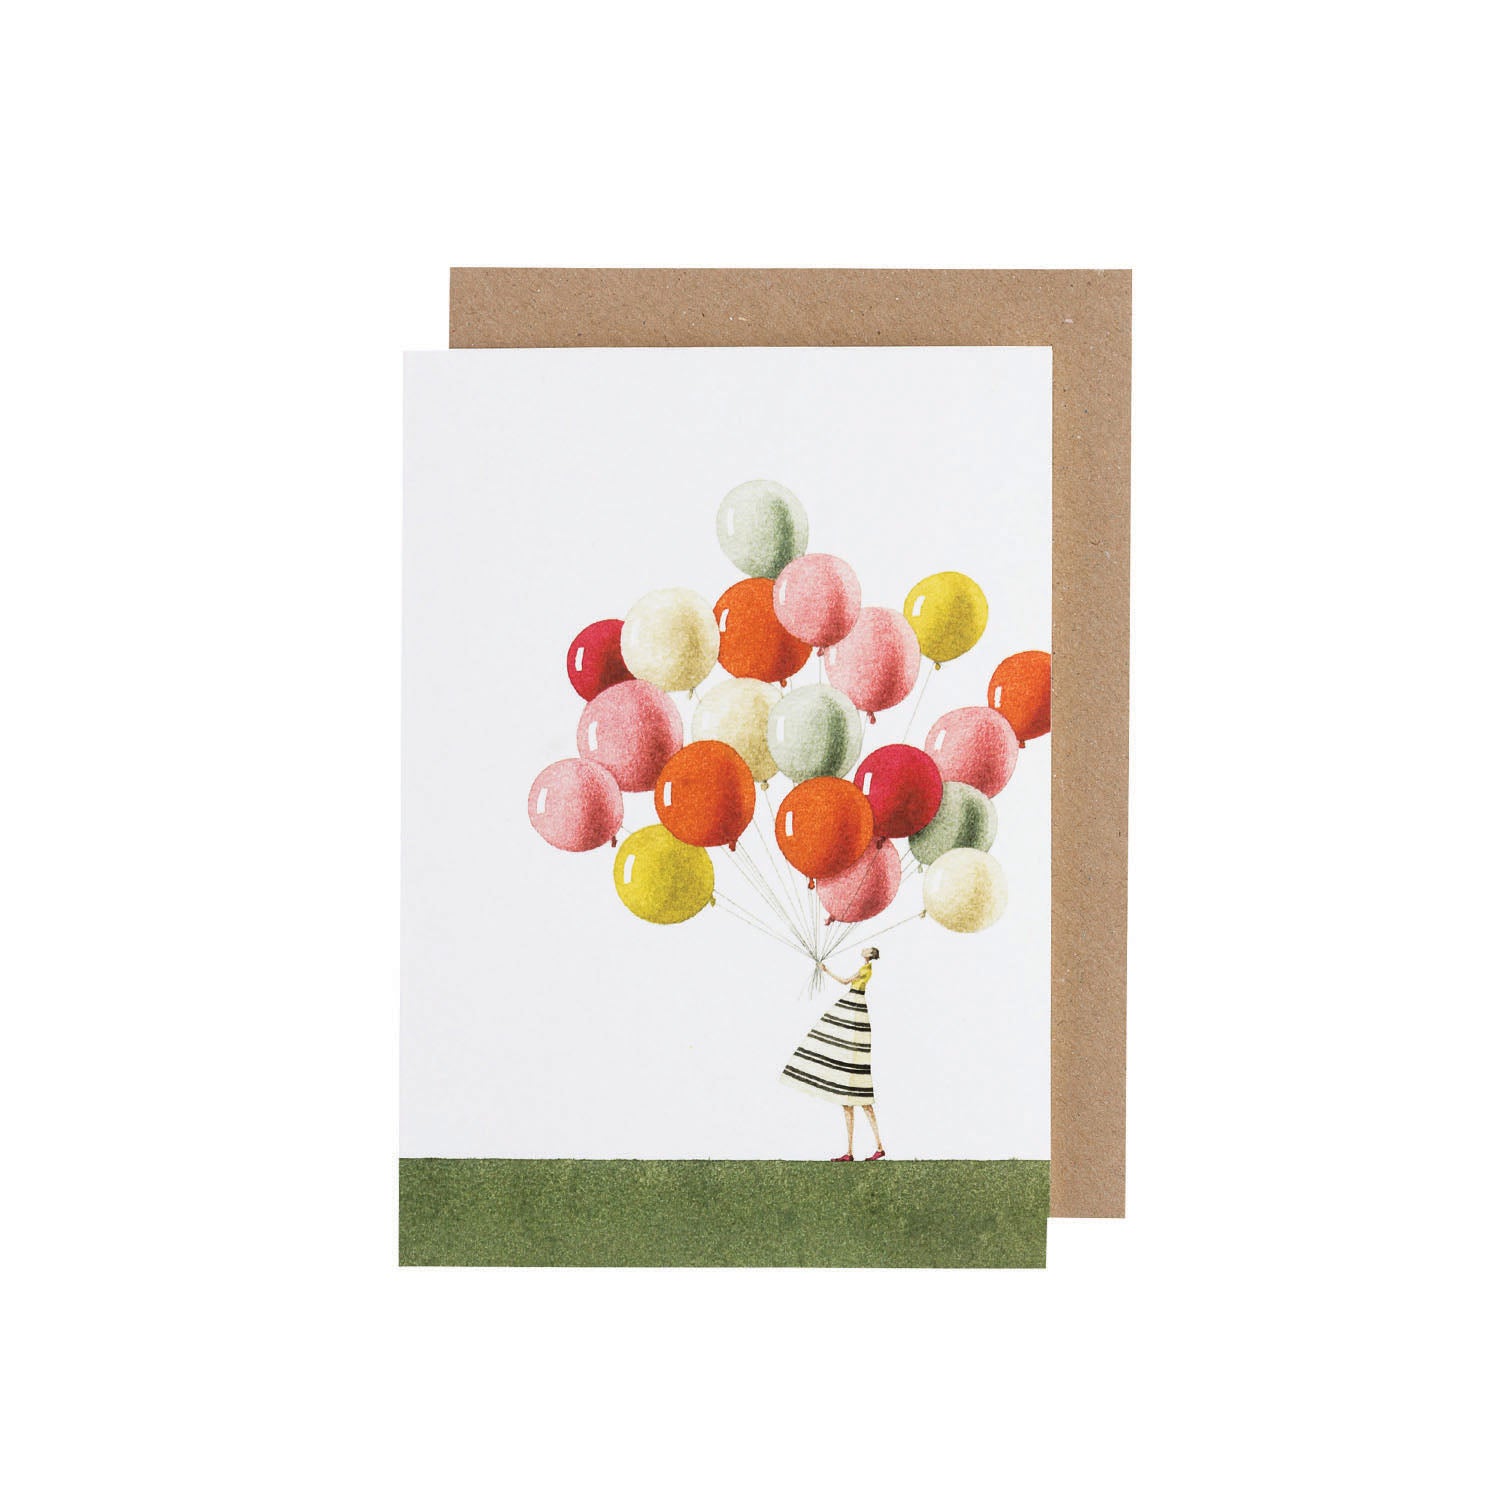 An environmentally sustainable Hester &amp; Cook Balloons Card, Set of 10, featuring a girl holding balloons.